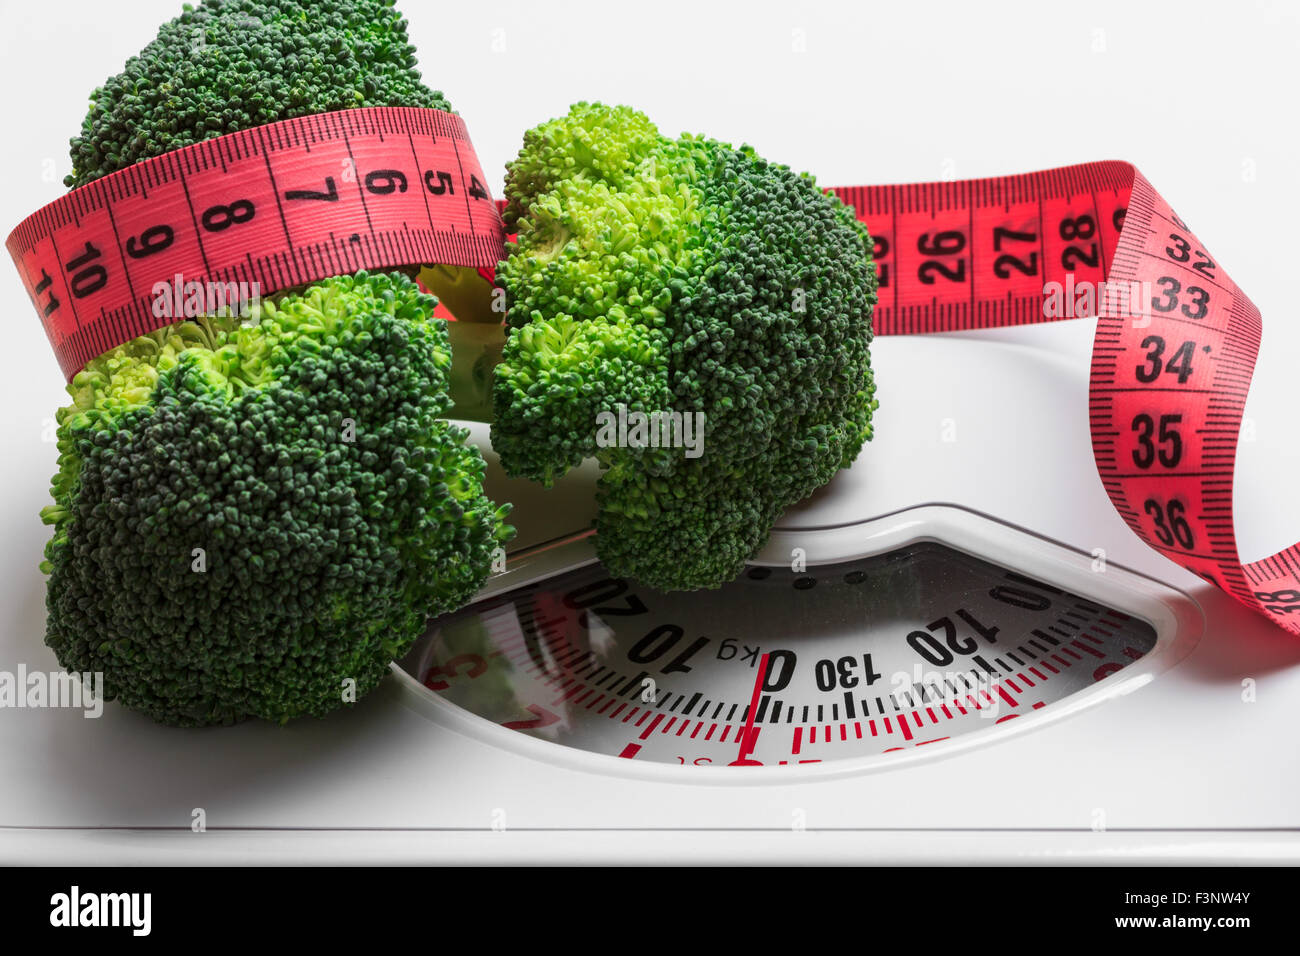 Dieting healthy eating slim down weight control concept. Closeup green broccoli with measuring tape on white scales Stock Photo